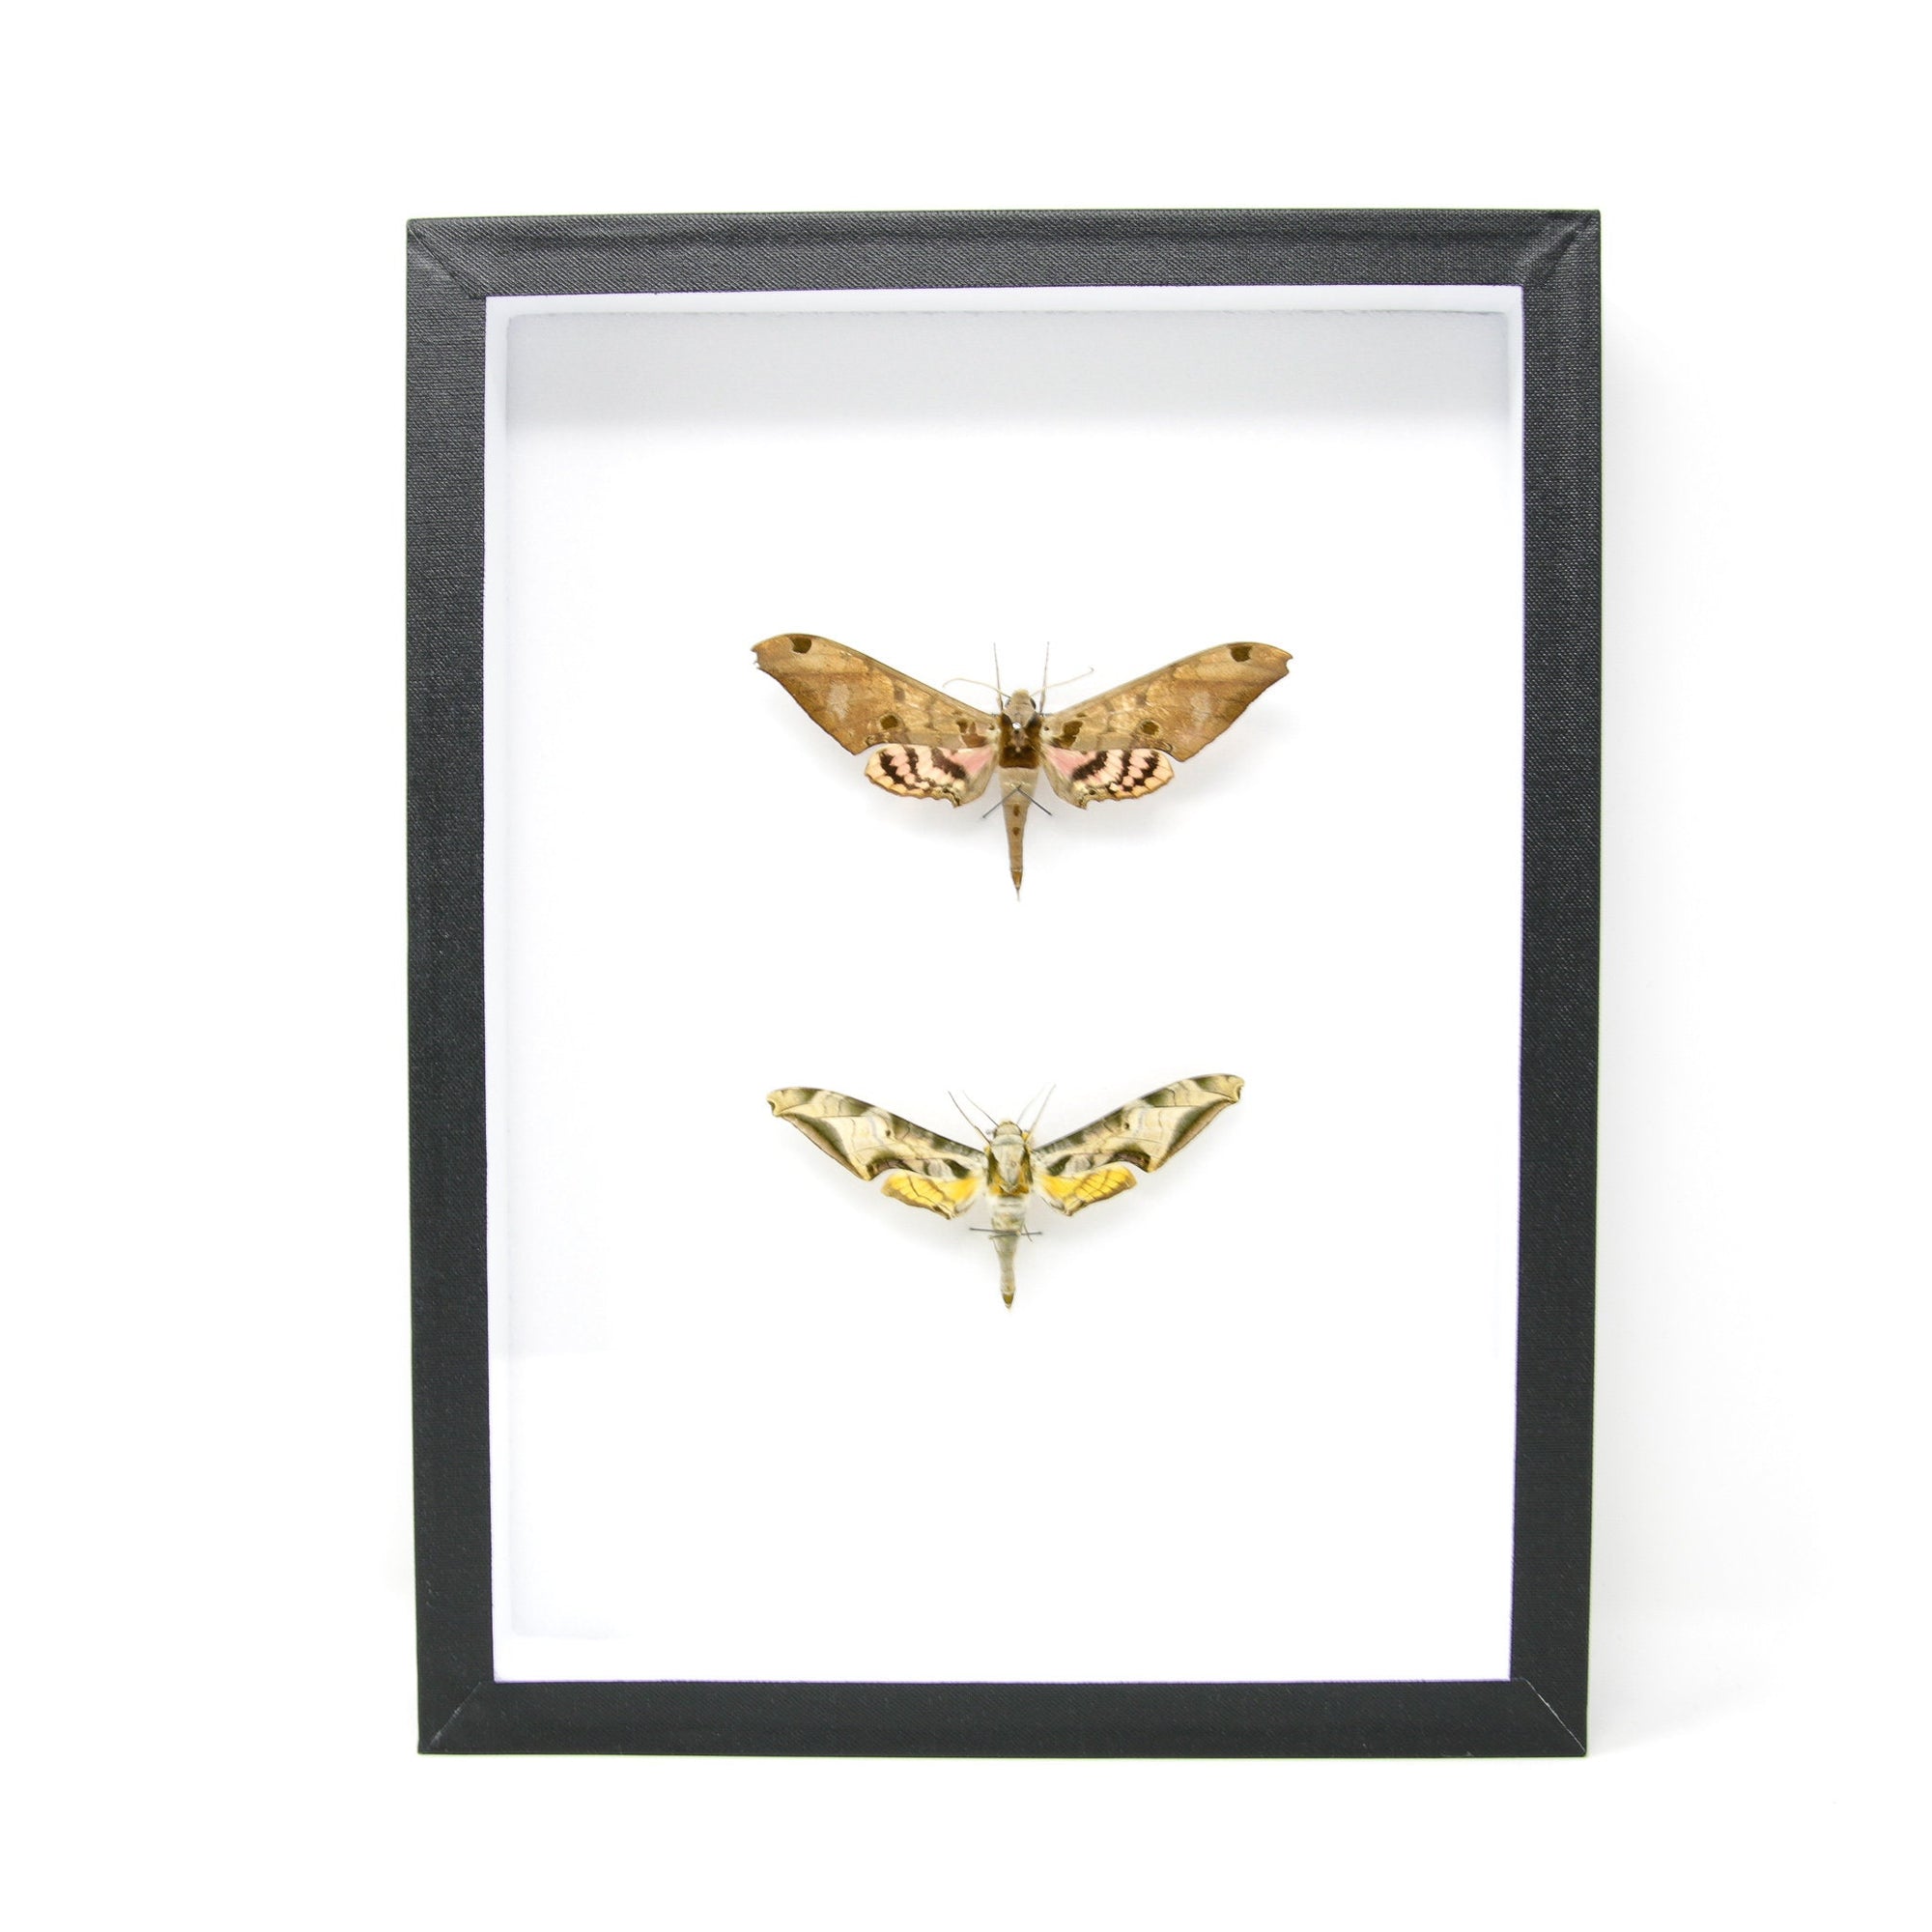 Hawkmoth Taxidermy Specimens | Pinned Lepidoptera with Scientific Collection Data, Entomology Box Frame | 12x9x2 inch  BFS05